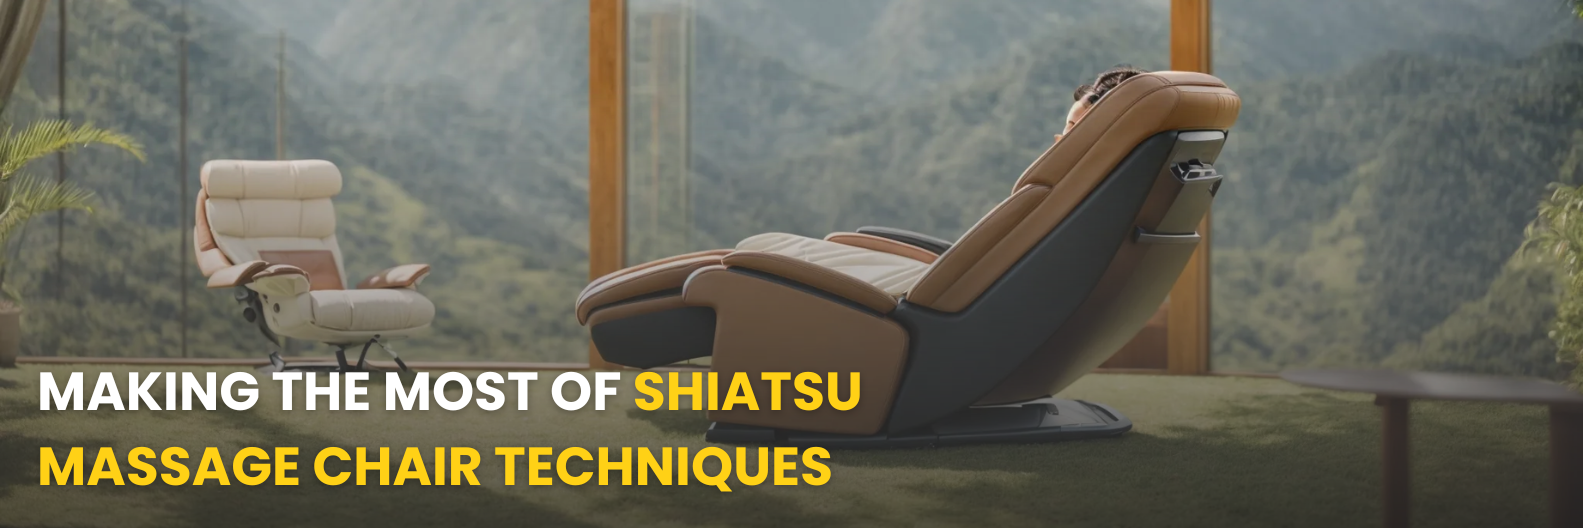 Maximize relaxation with Shiatsu chair techniques: target pressure points, adjust intensity, and enjoy regular, soothing sessions.